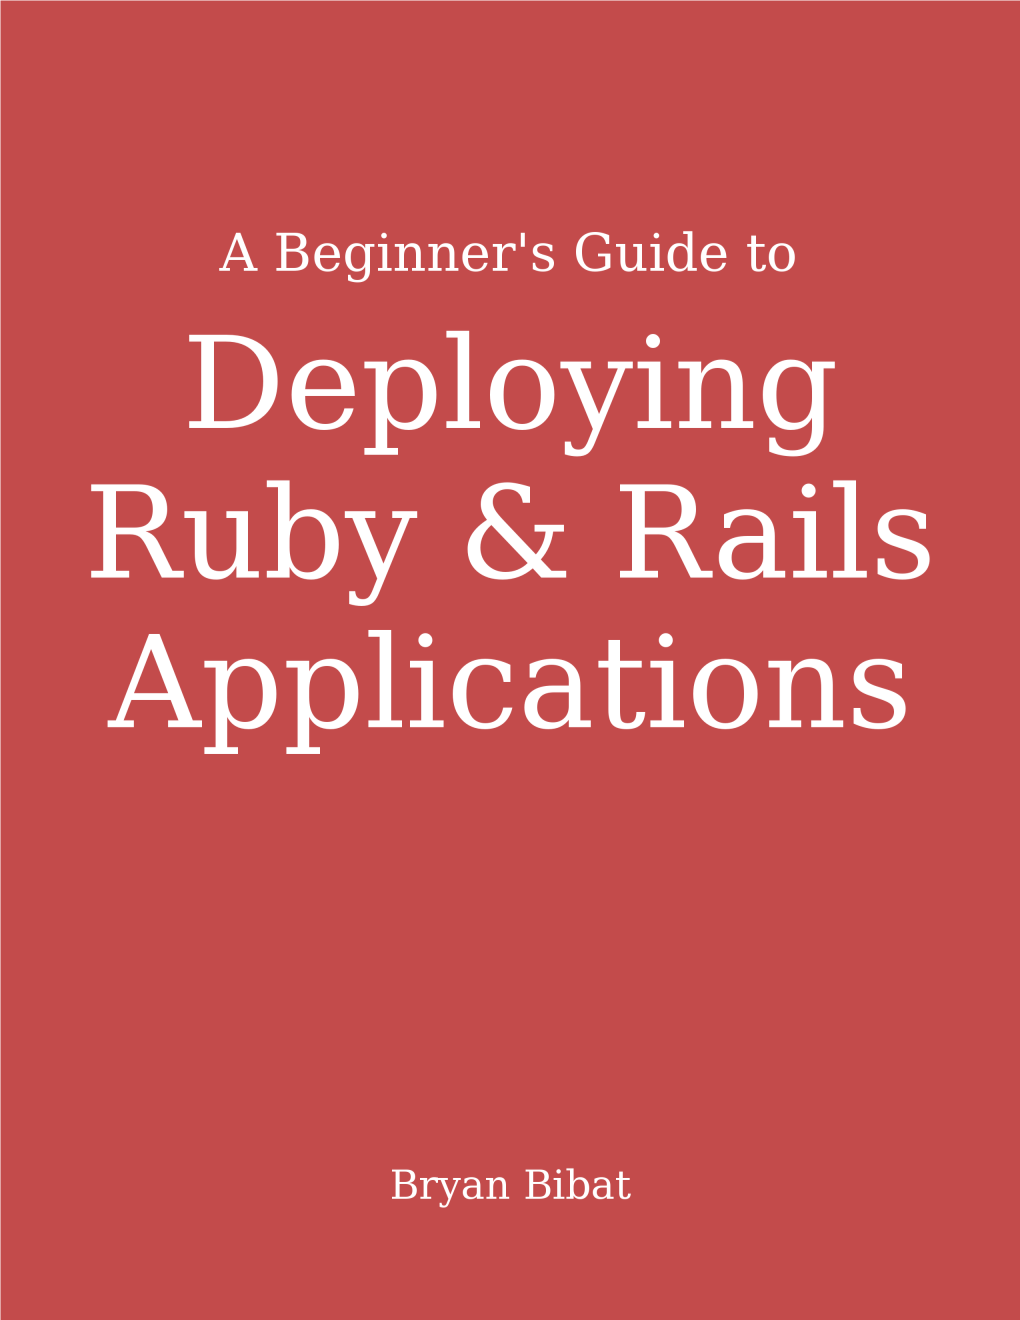 A Beginner's Guide to Deploying Rails